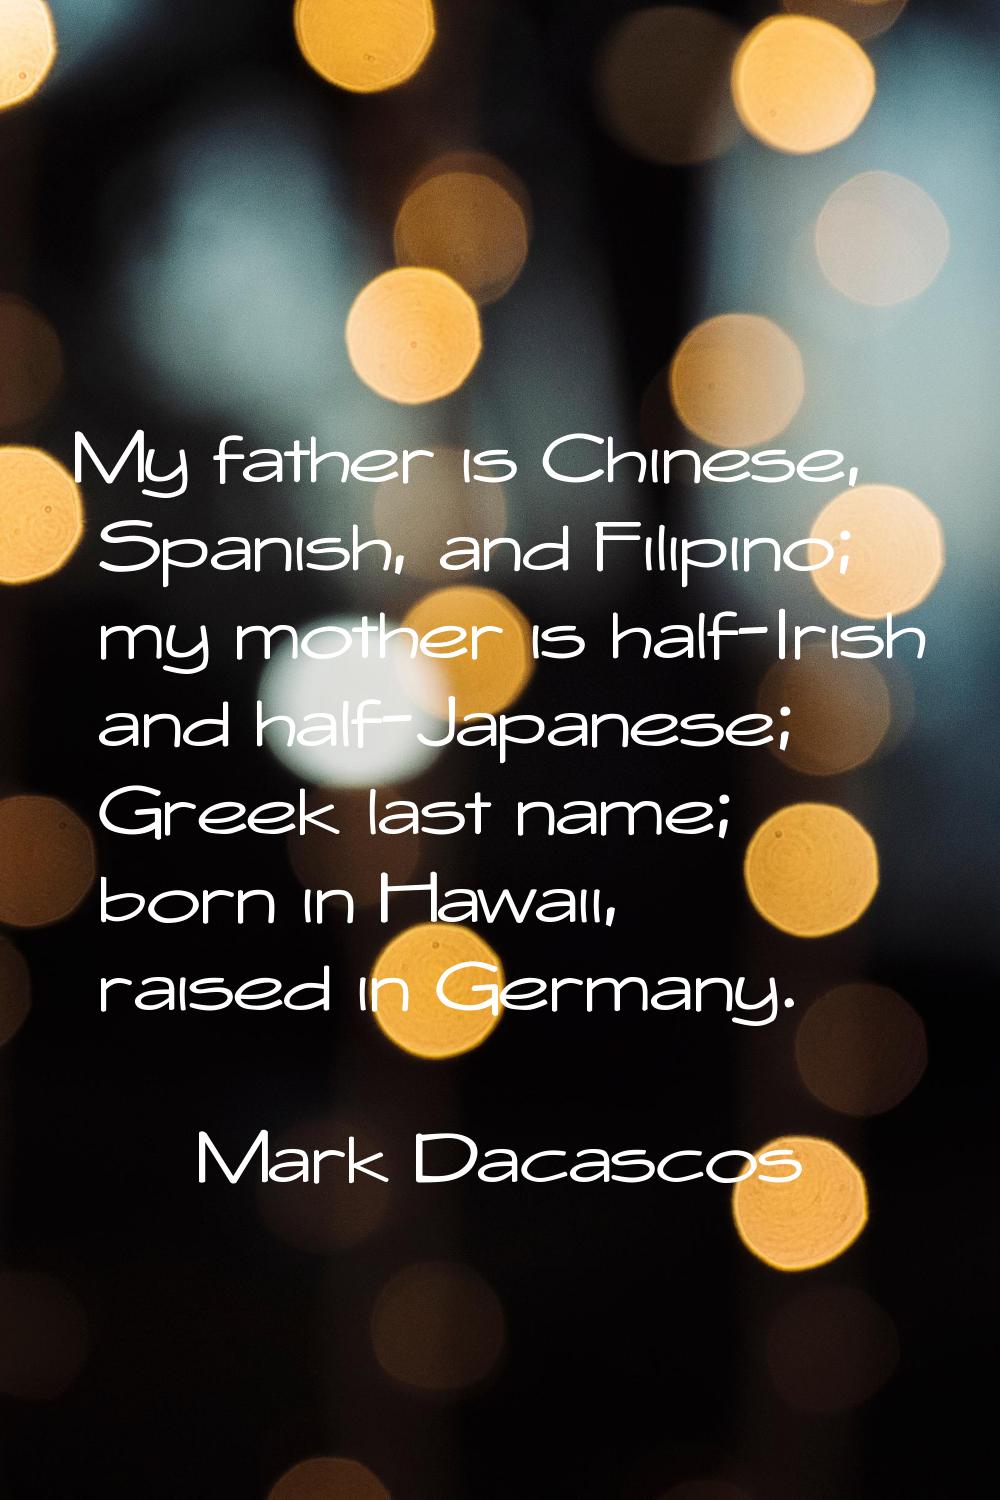 My father is Chinese, Spanish, and Filipino; my mother is half-Irish and half-Japanese; Greek last 